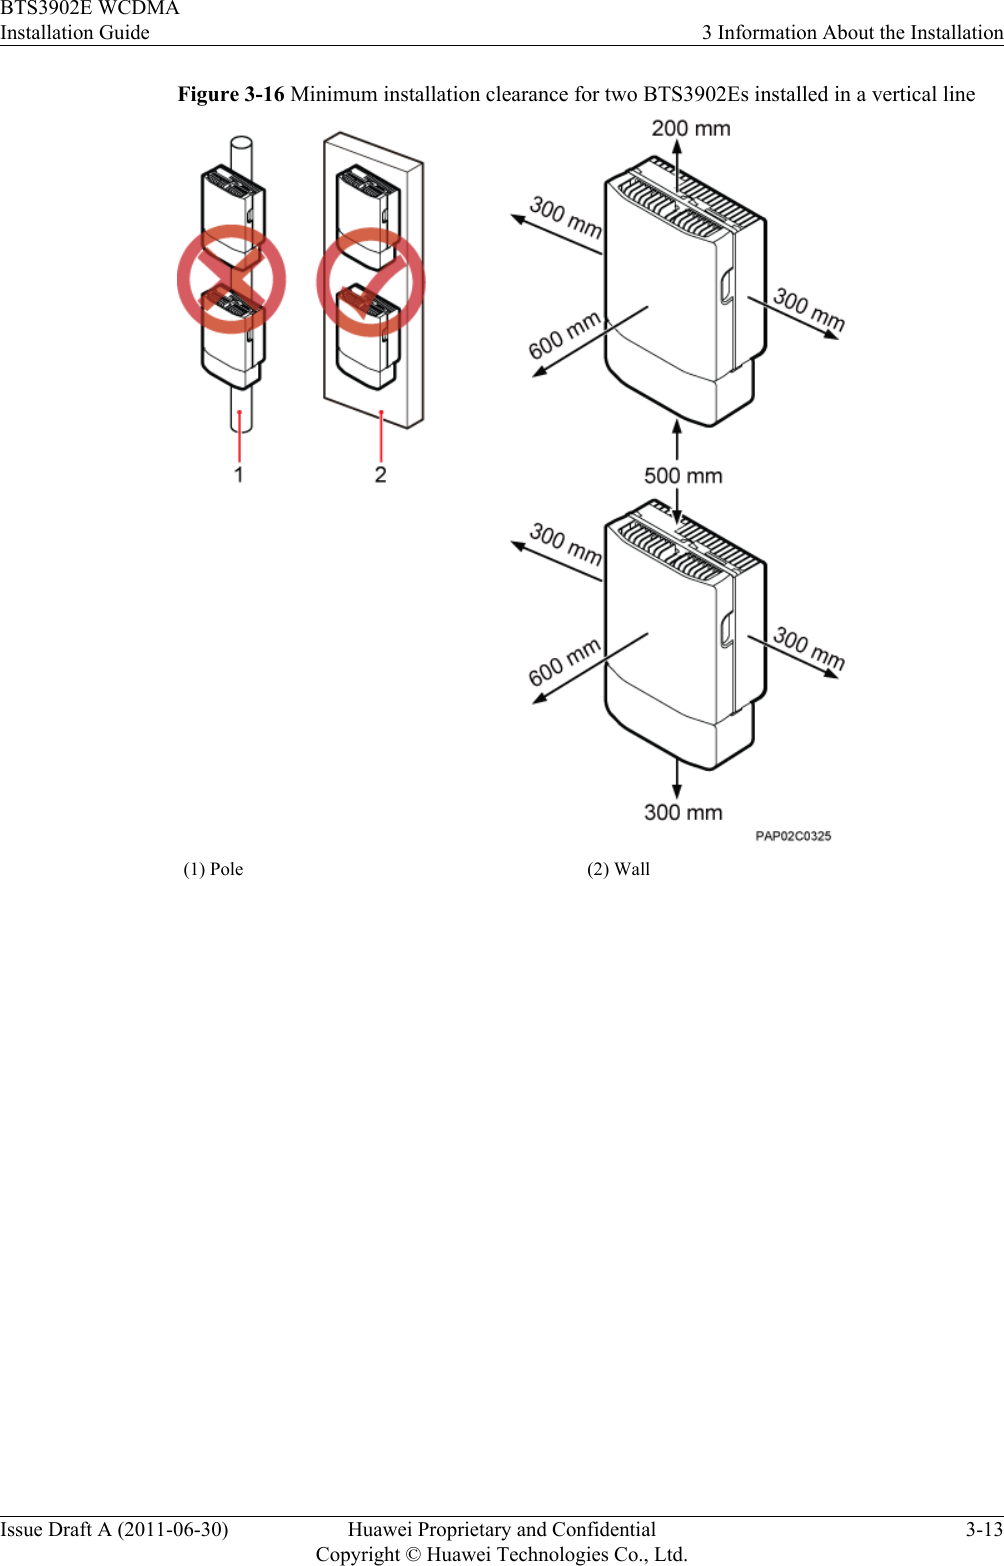 Figure 3-16 Minimum installation clearance for two BTS3902Es installed in a vertical line(1) Pole (2) WallBTS3902E WCDMAInstallation Guide 3 Information About the InstallationIssue Draft A (2011-06-30) Huawei Proprietary and ConfidentialCopyright © Huawei Technologies Co., Ltd.3-13